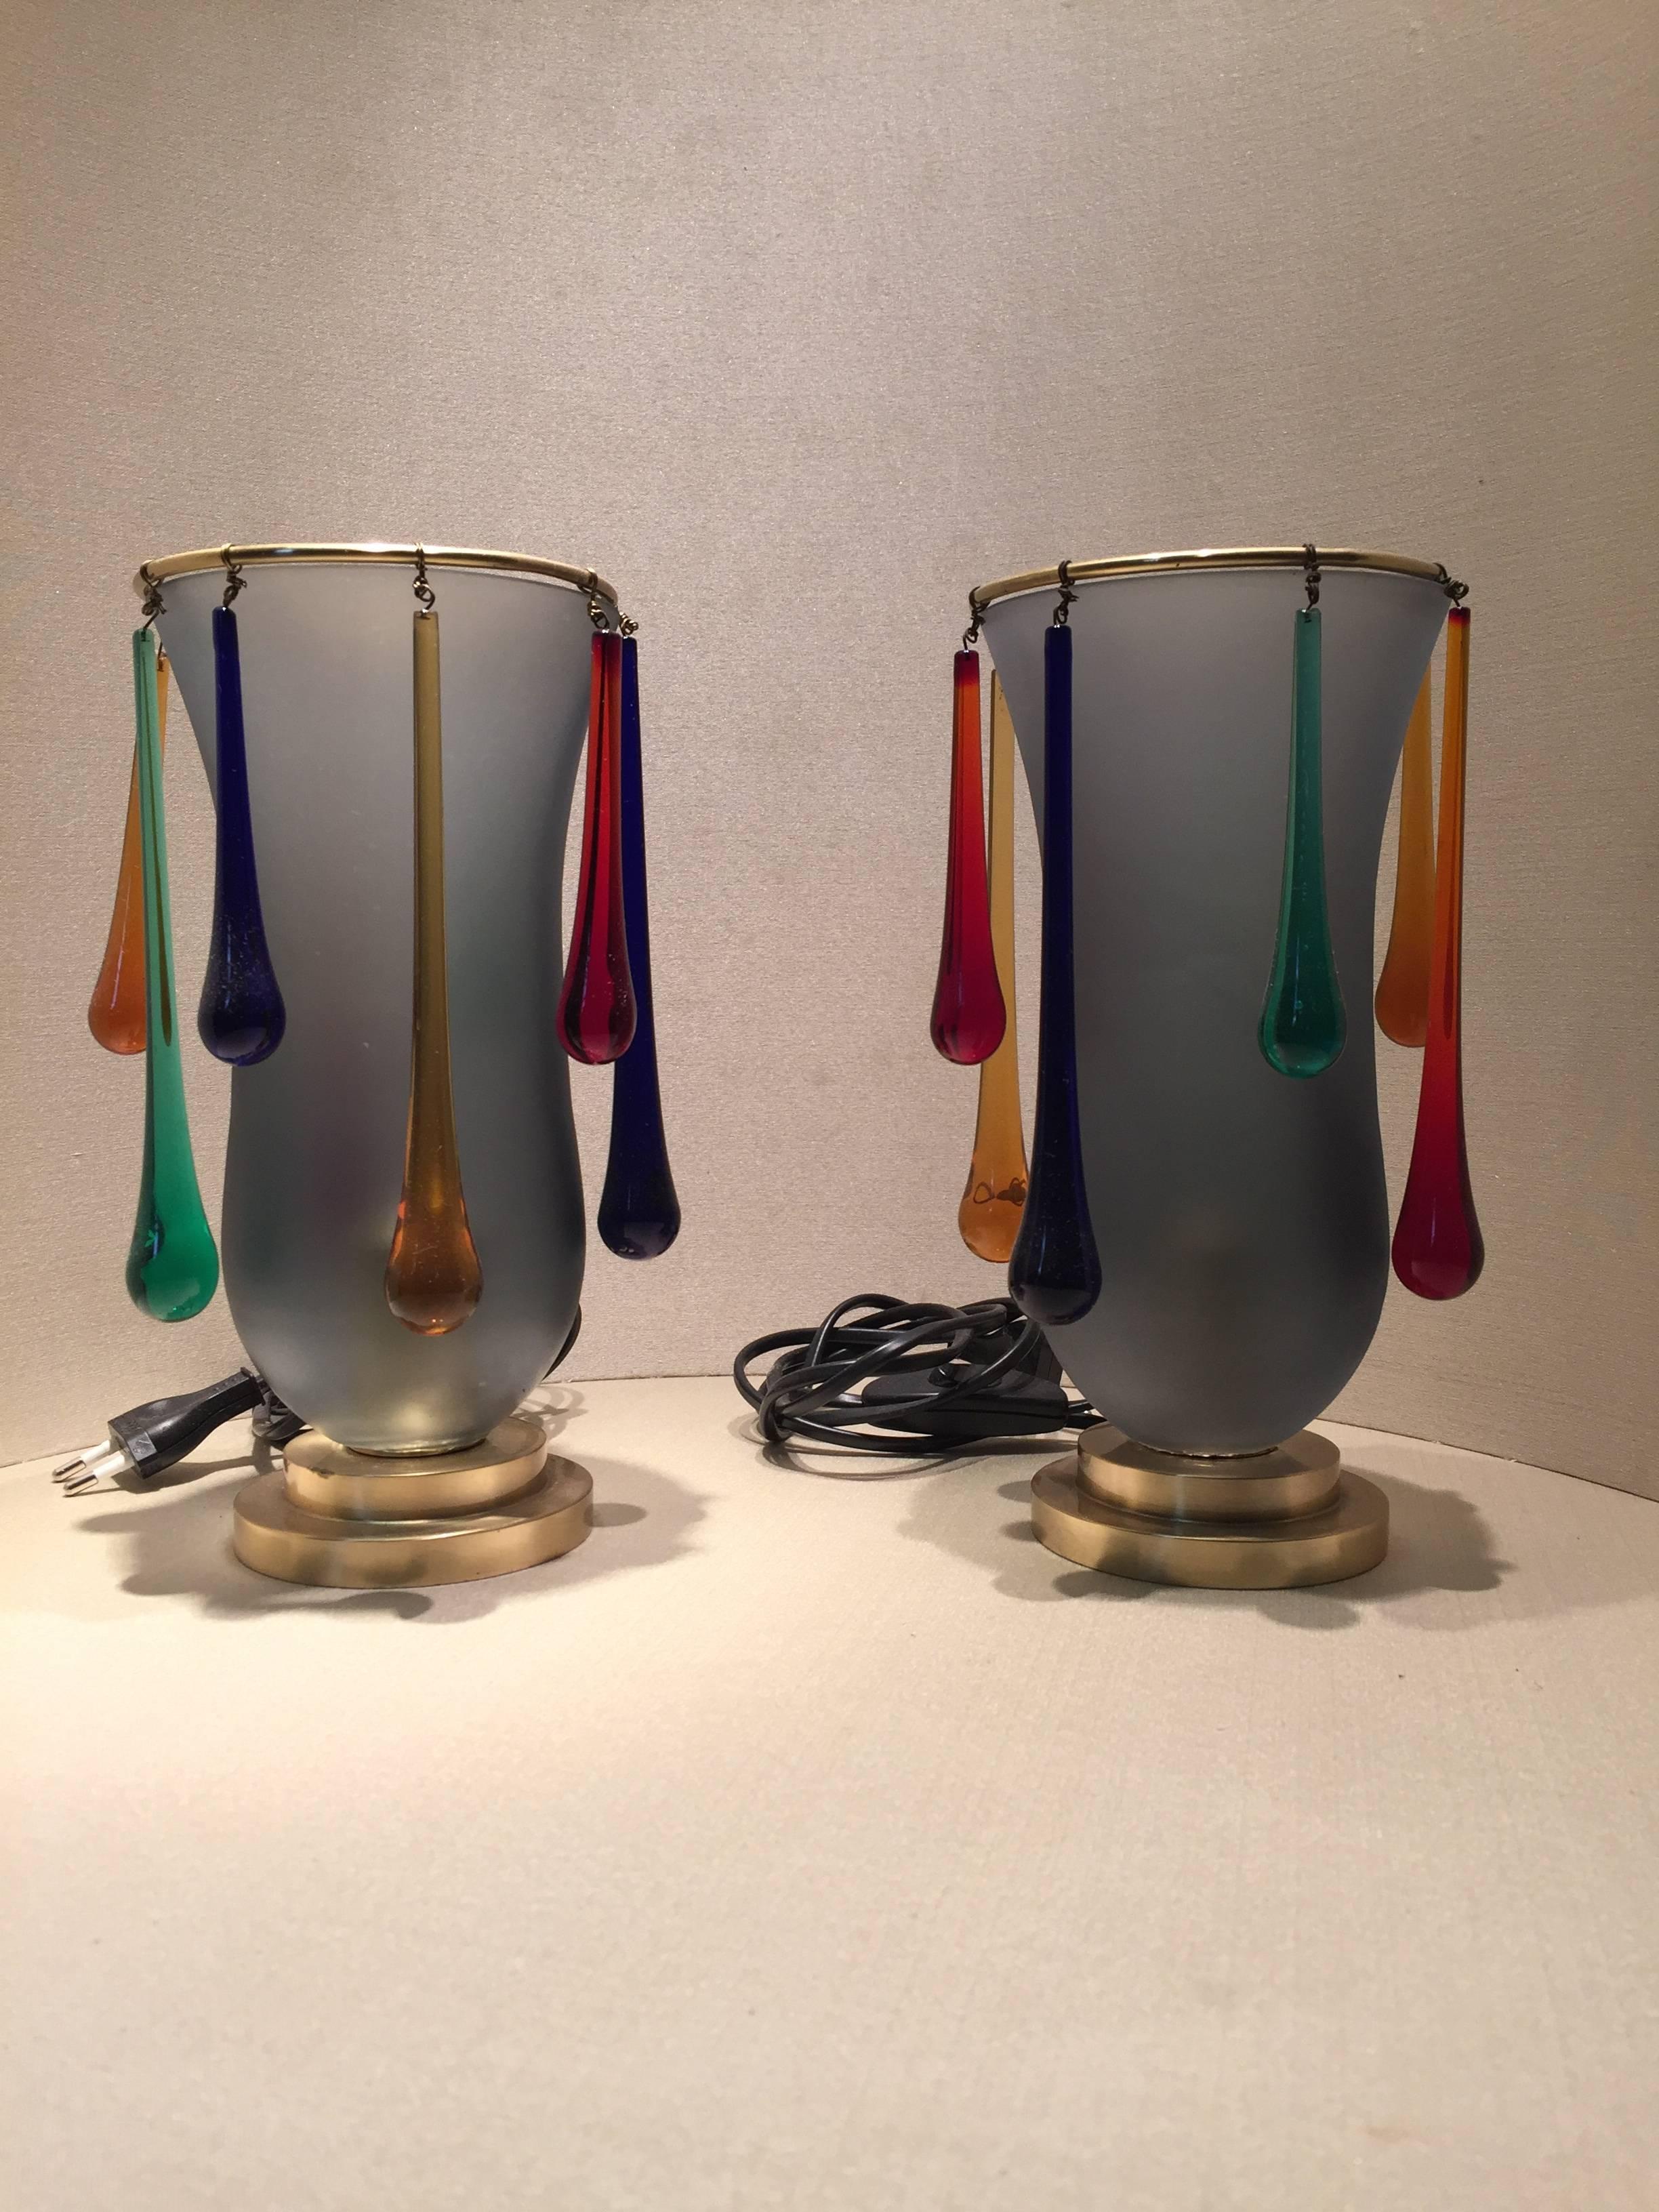 Beautiful pair of table lamps with glass pendants, brass base.
Made by Stefano Toso glass factory